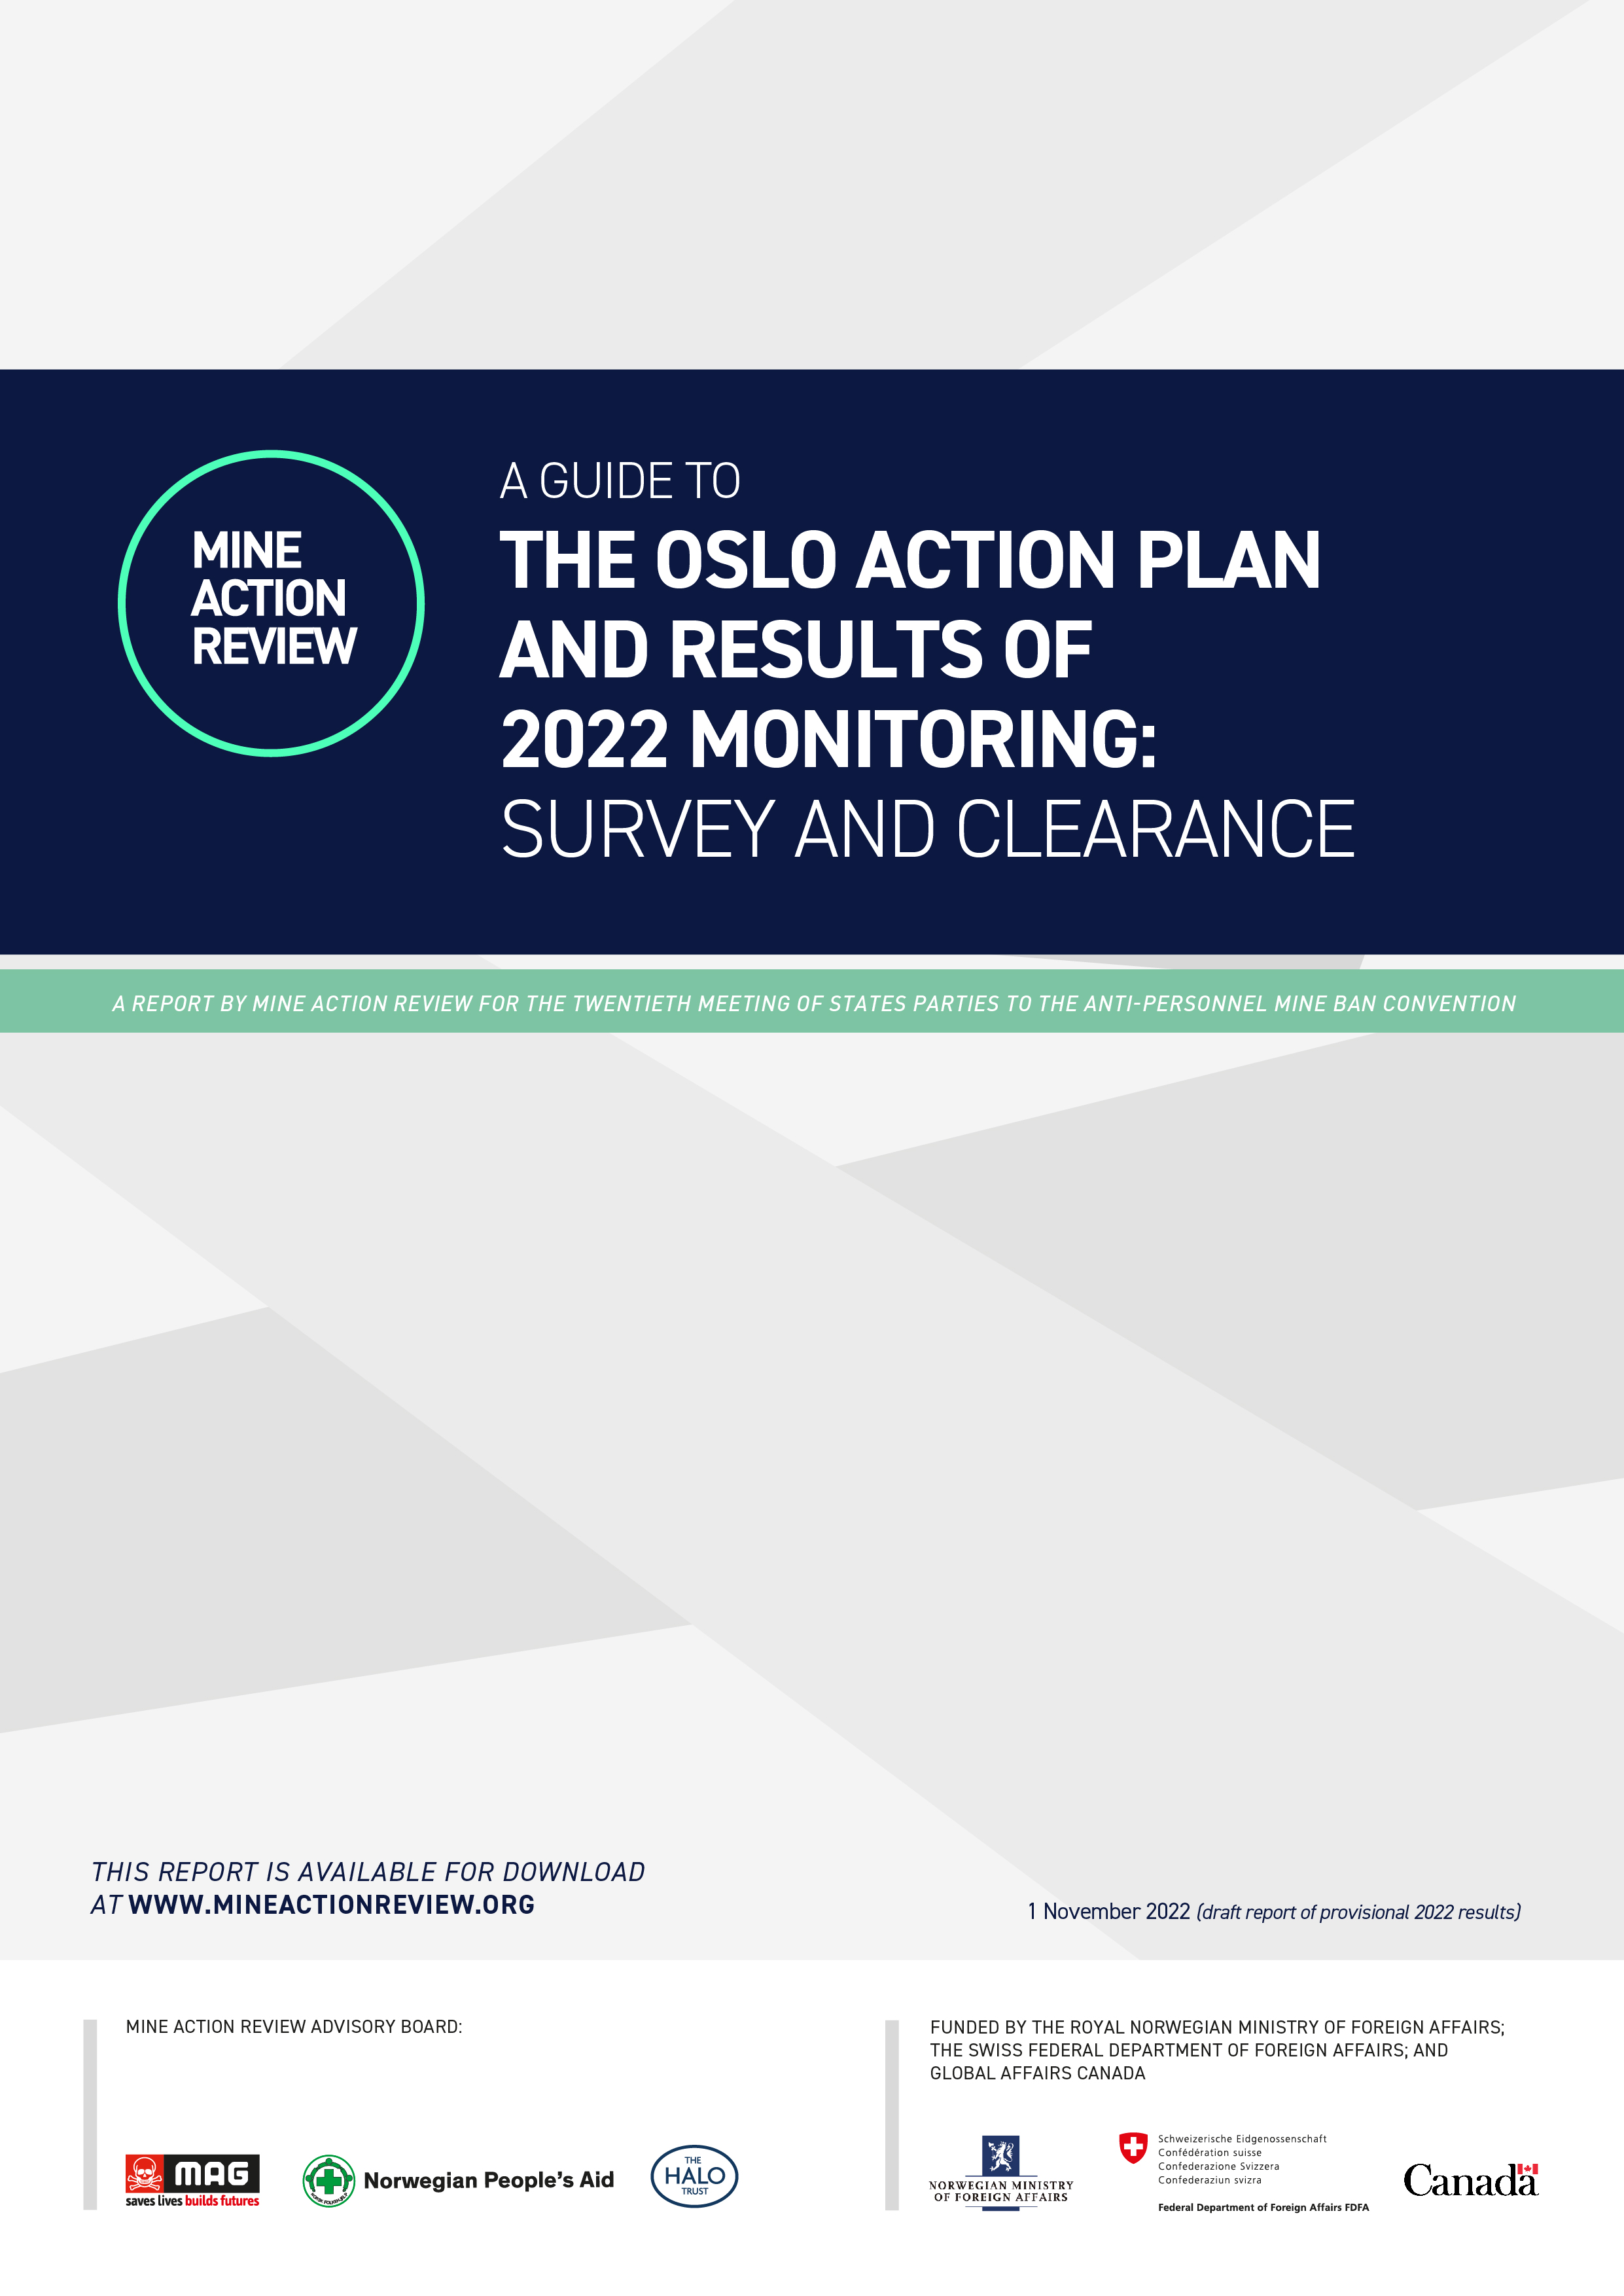 Guide to the Oslo Action Plan and Provisional Results of 2022 Monitoring